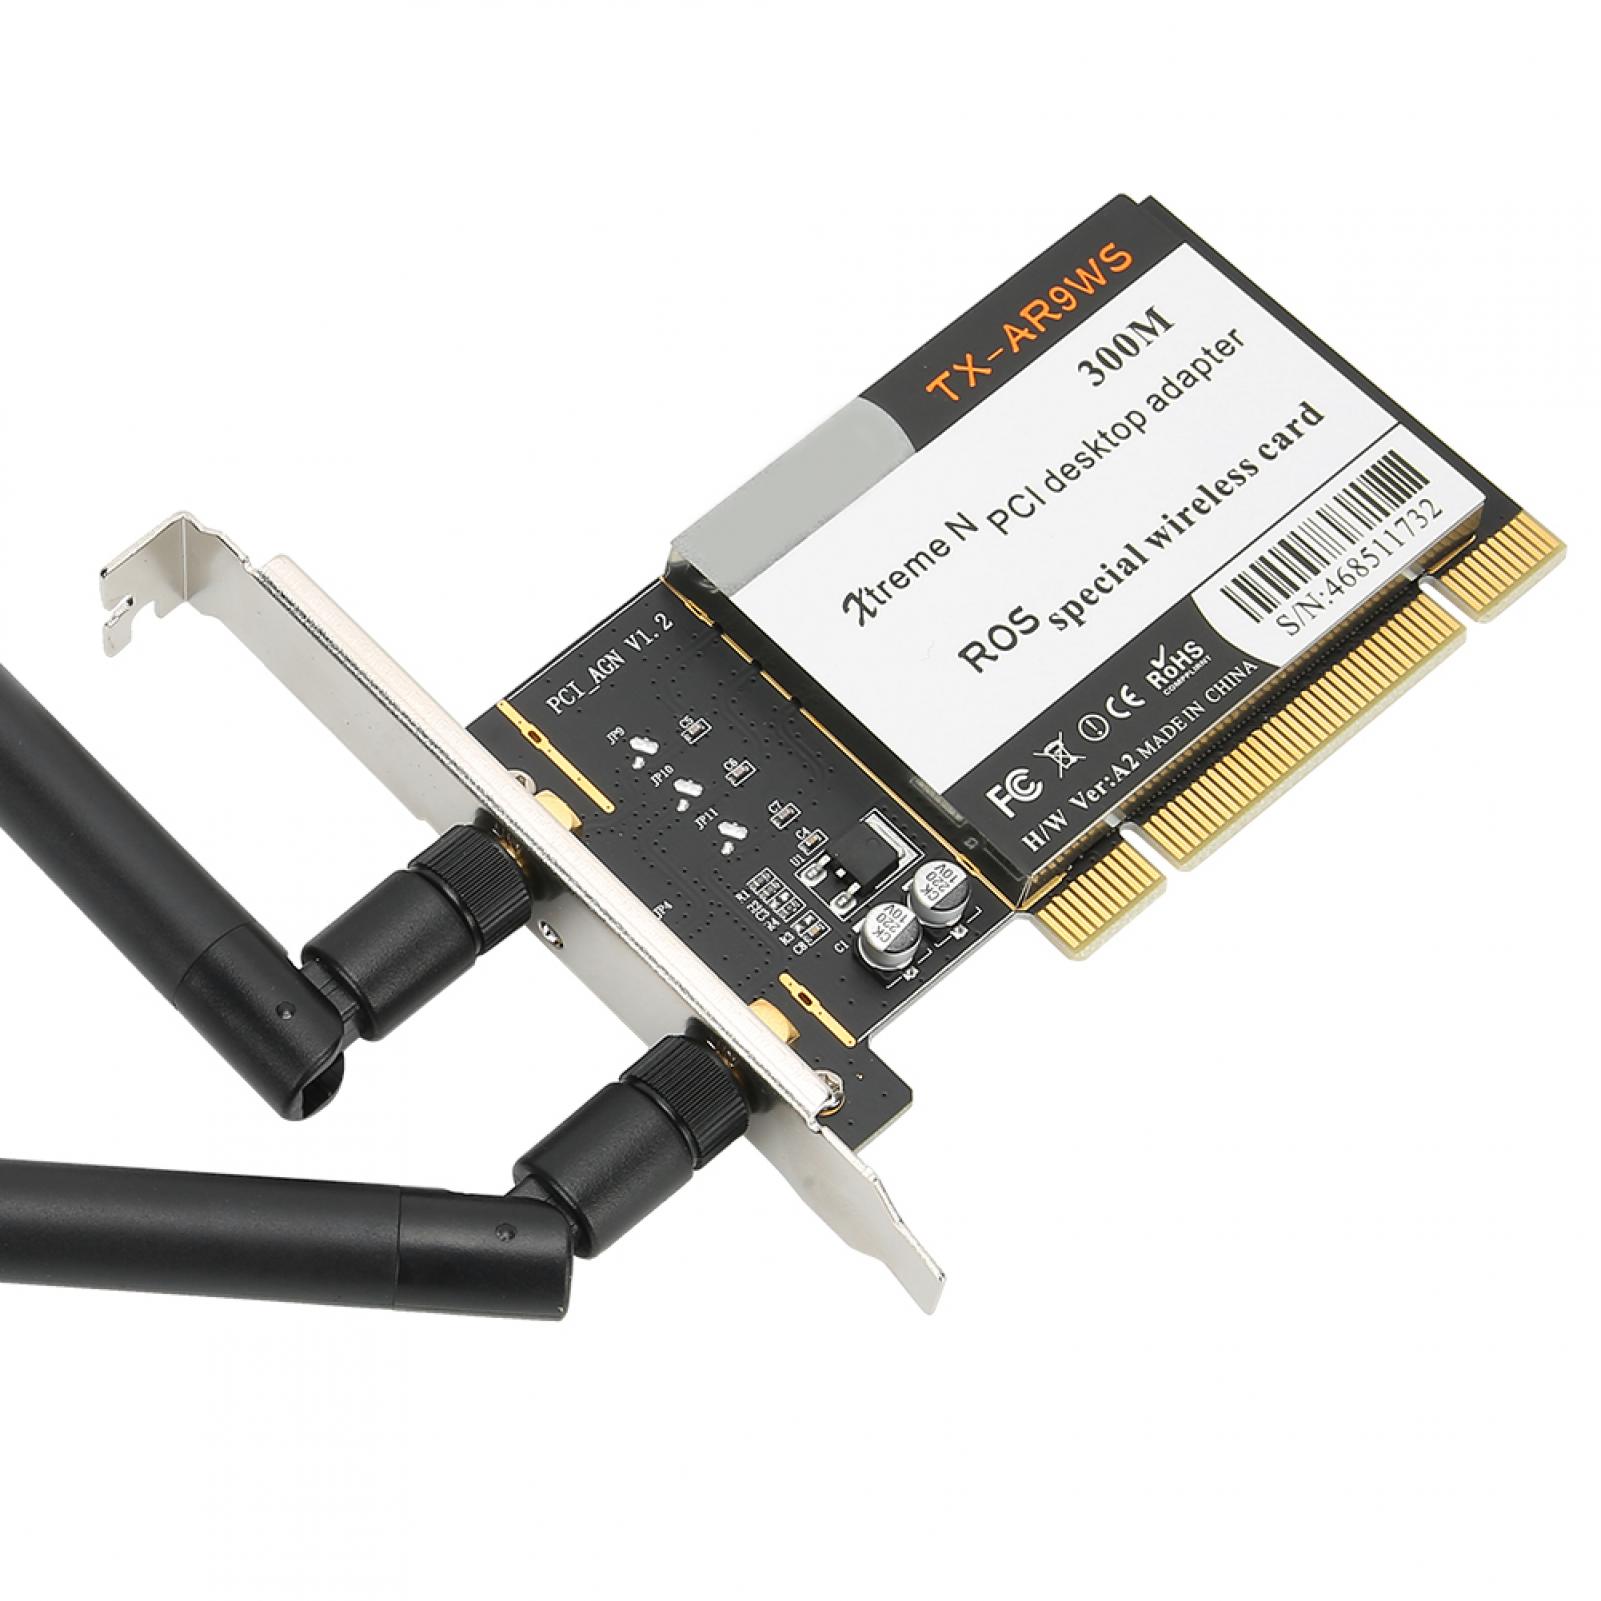 PCI Wifi Card Network Card, Ar9220 PCI Desktop Adapter, For Xp 32/64 - image 5 of 8